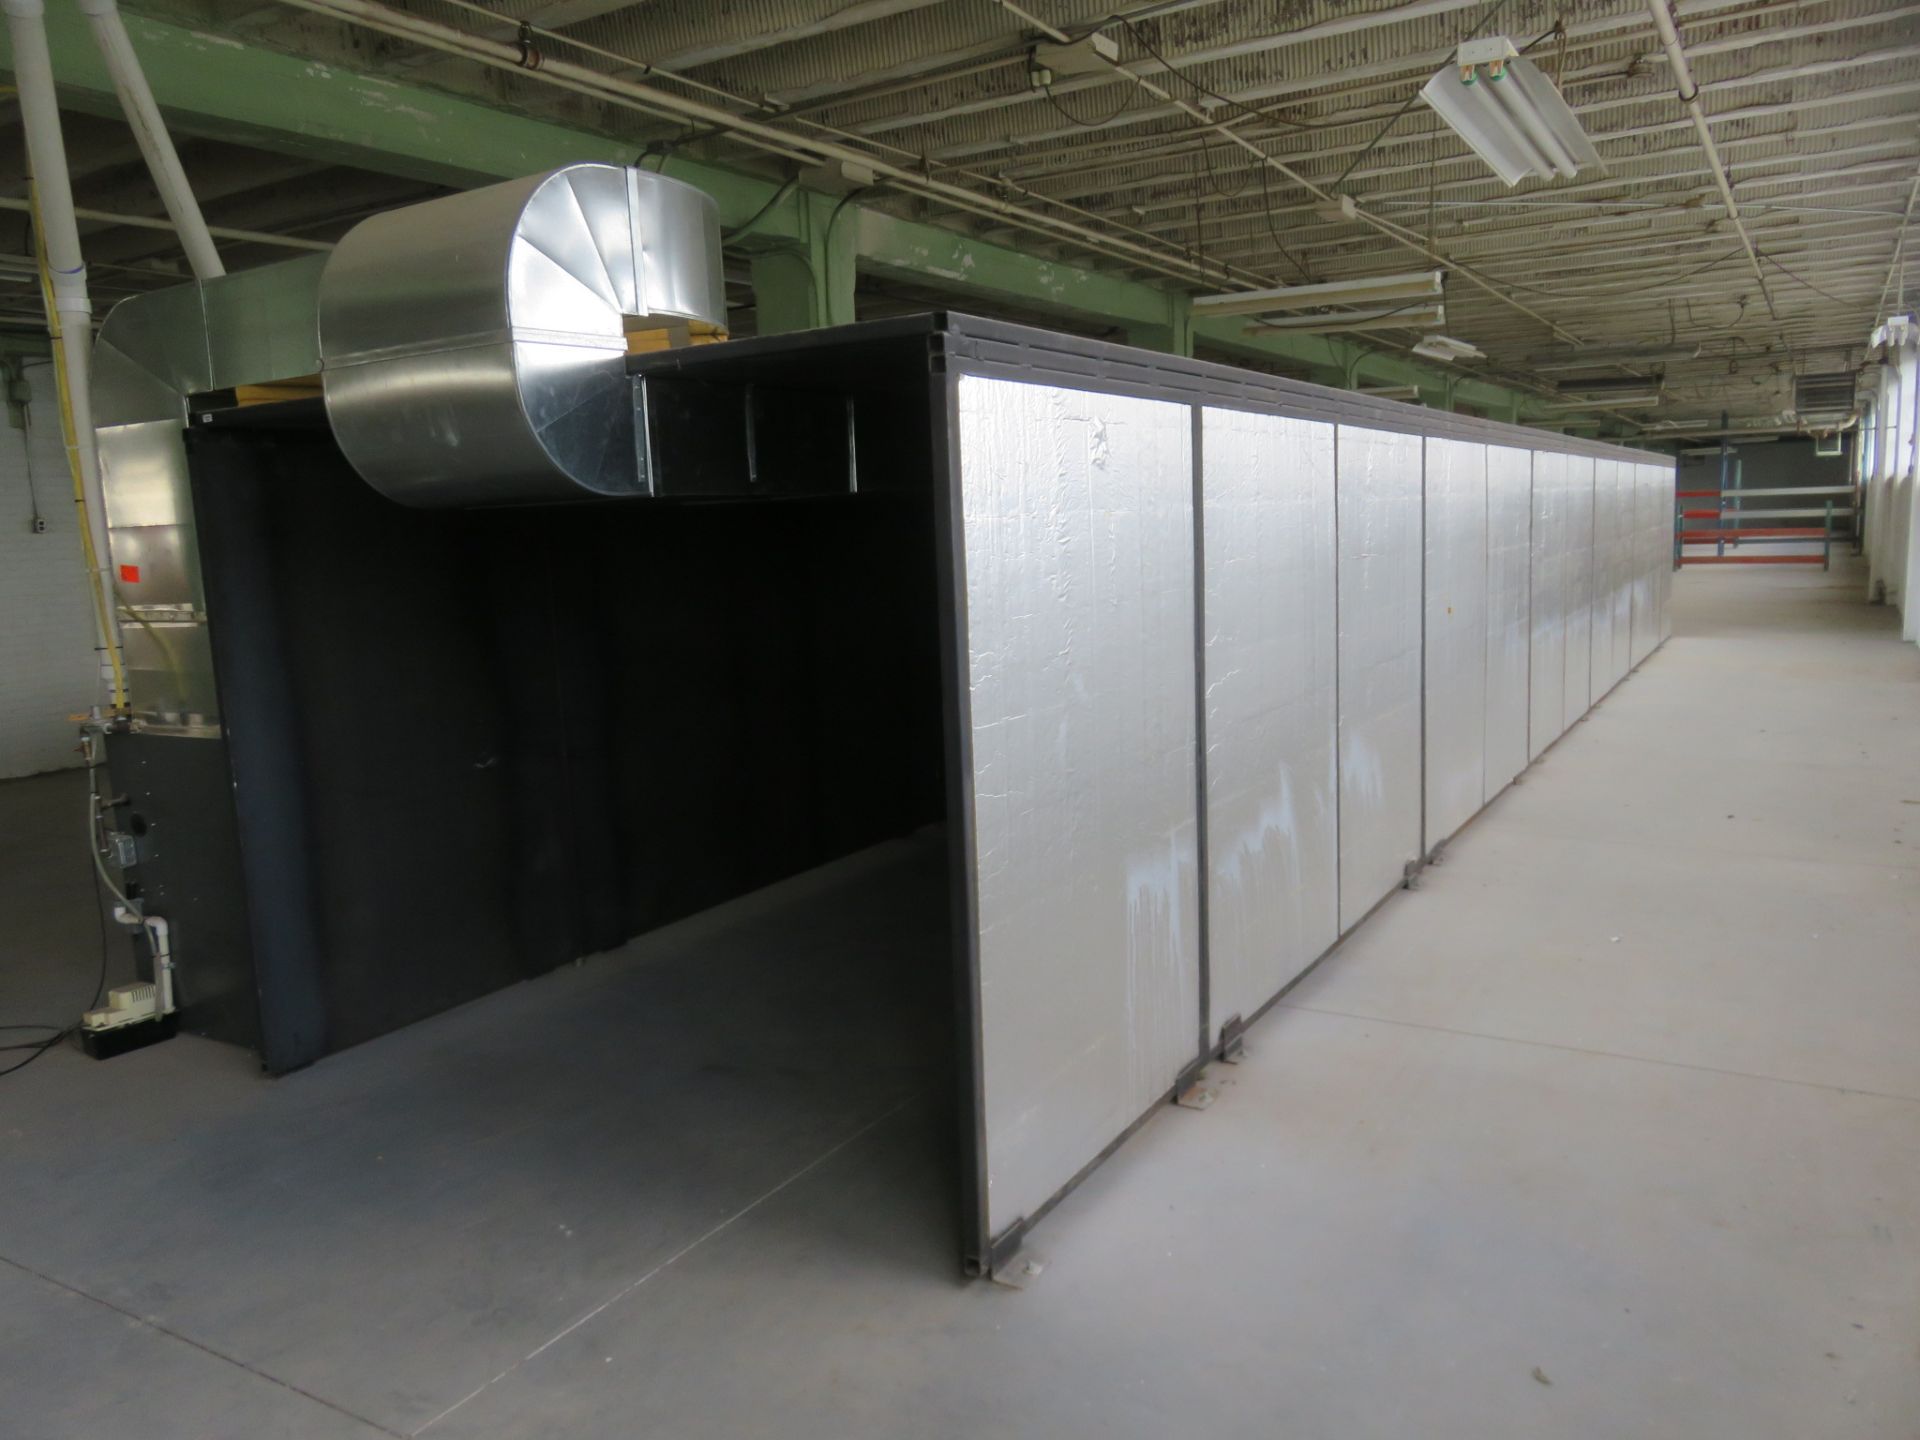 NEW Oven Paint Drying Line w/ Gas Amana Furnace approx. 48' x 8' x 6'